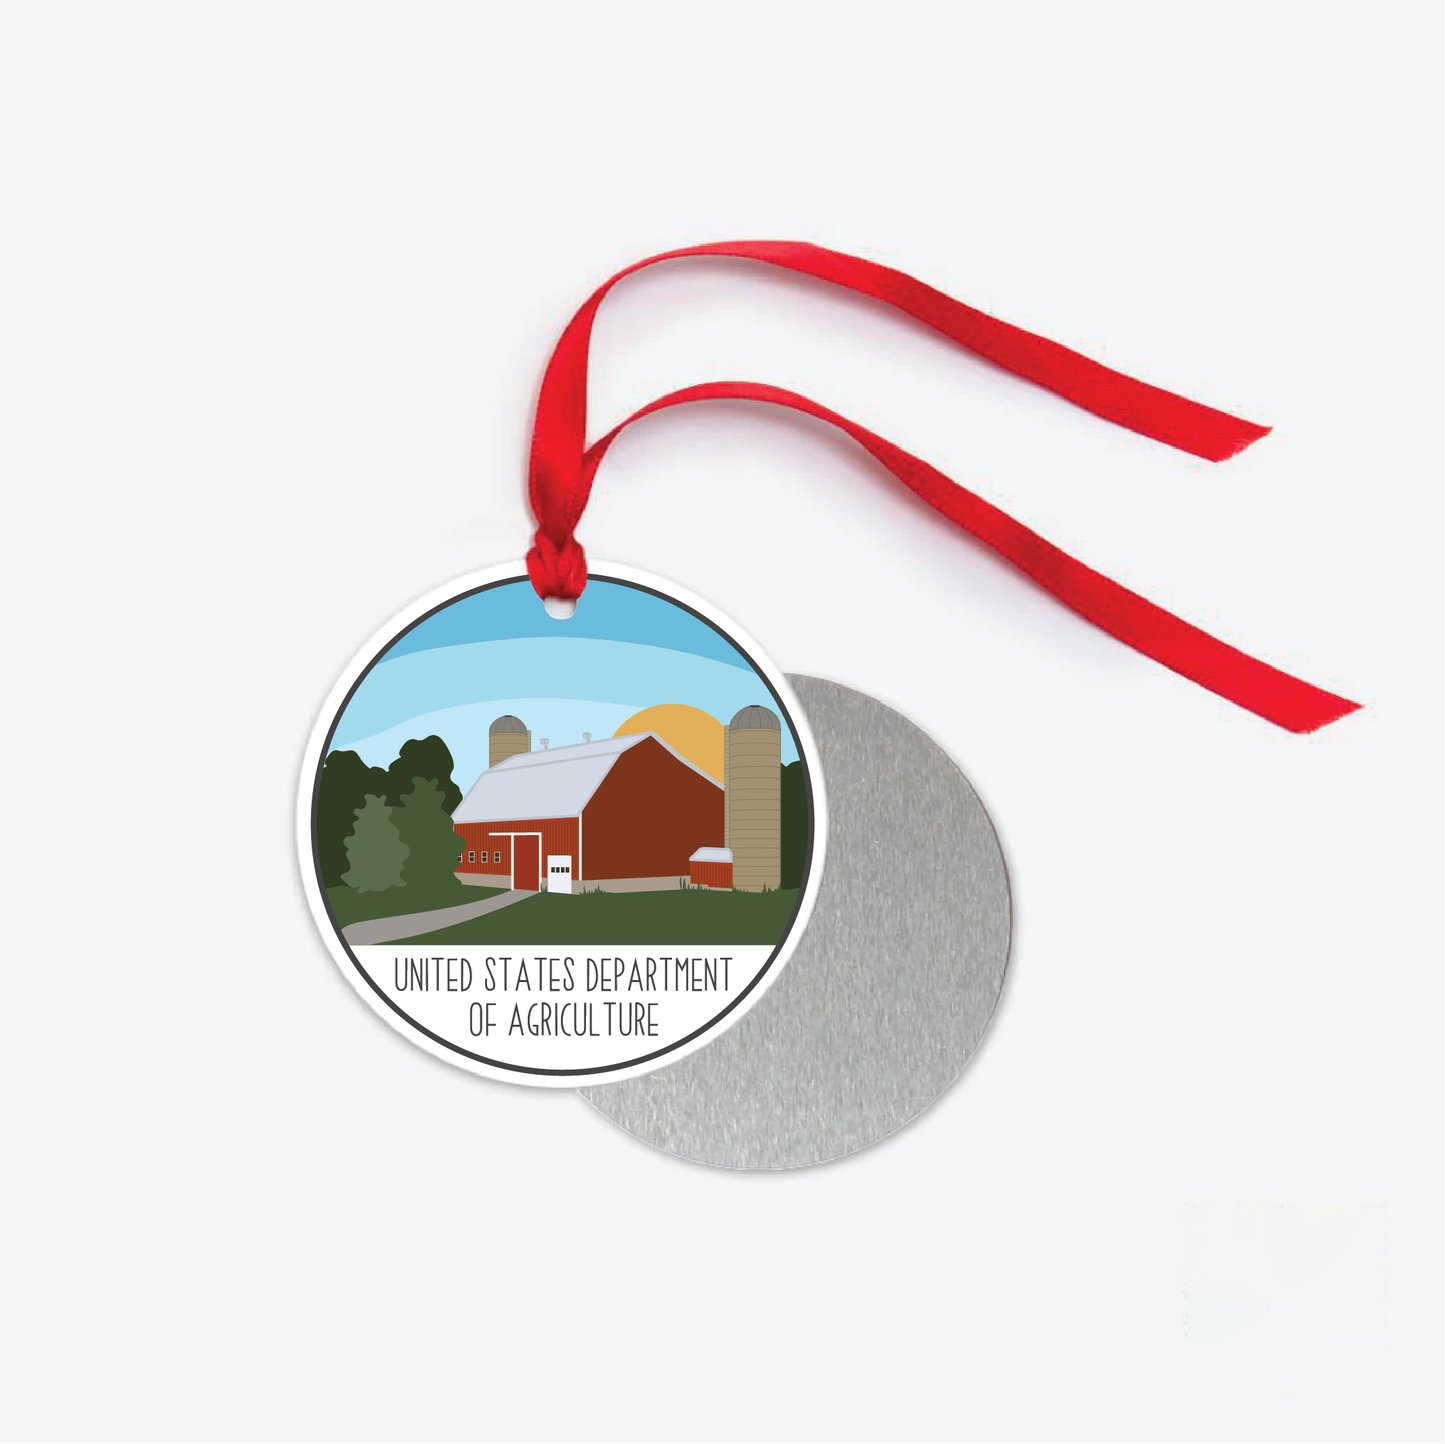 United States Department of Agriculture Ornament